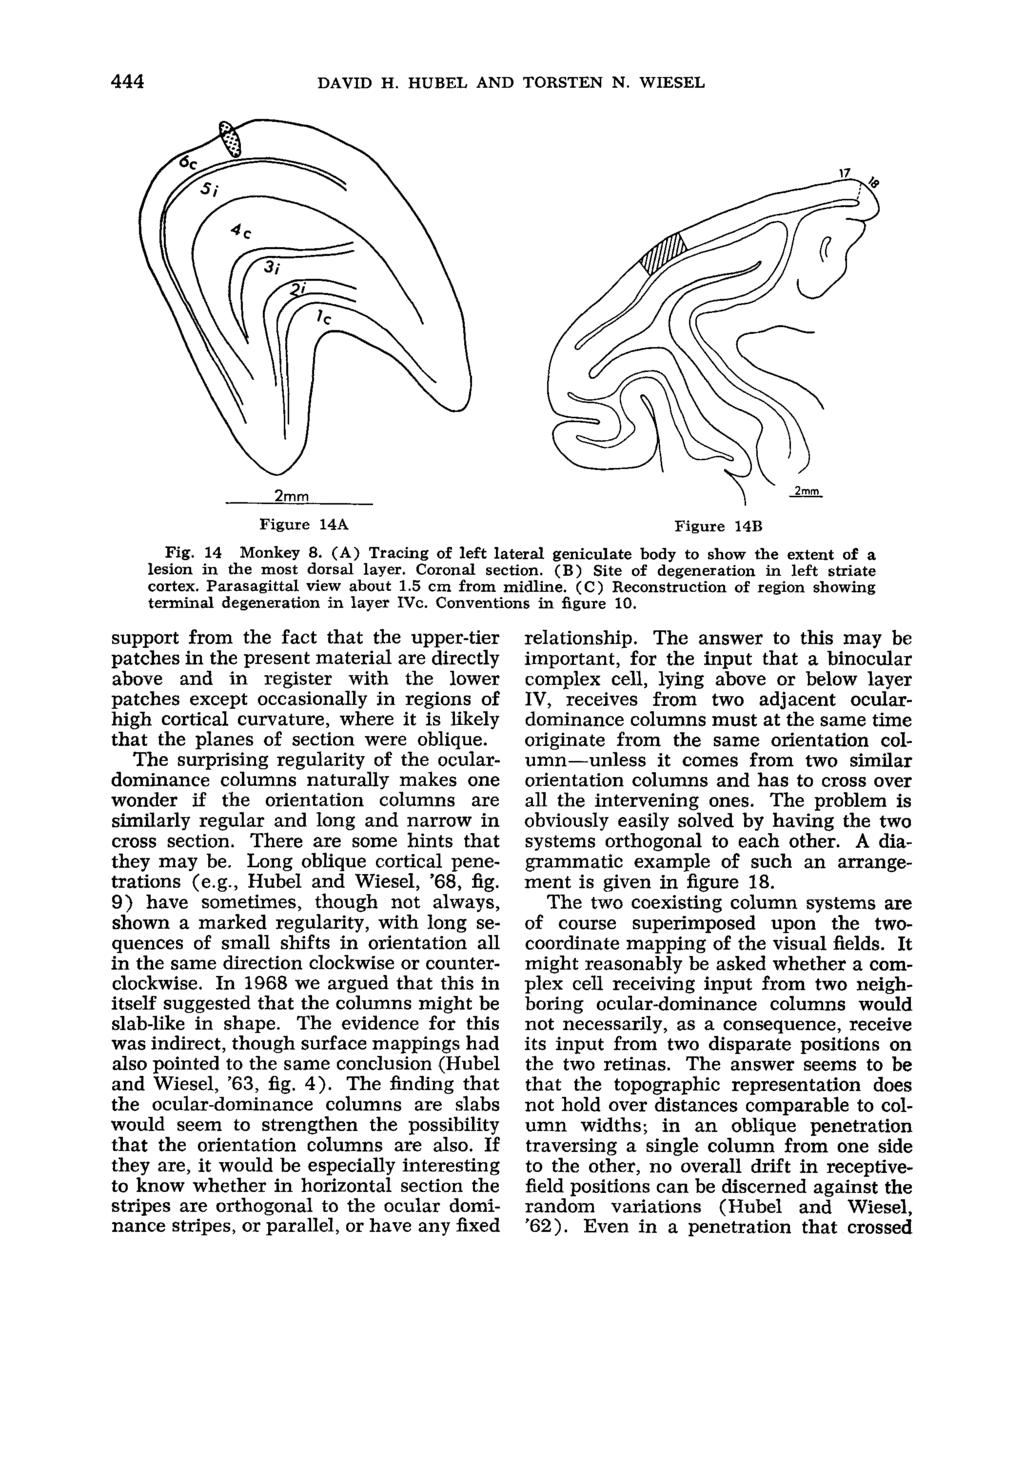 444 DAVID H. HUBEL AND TORSTEN N. WIESEL 2mm Figure 14A Figure 14B Fig. 14 Monkey 8. (A) Tracing of left lateral geniculate body to show the extent of a lesion in the most dorsal layer.